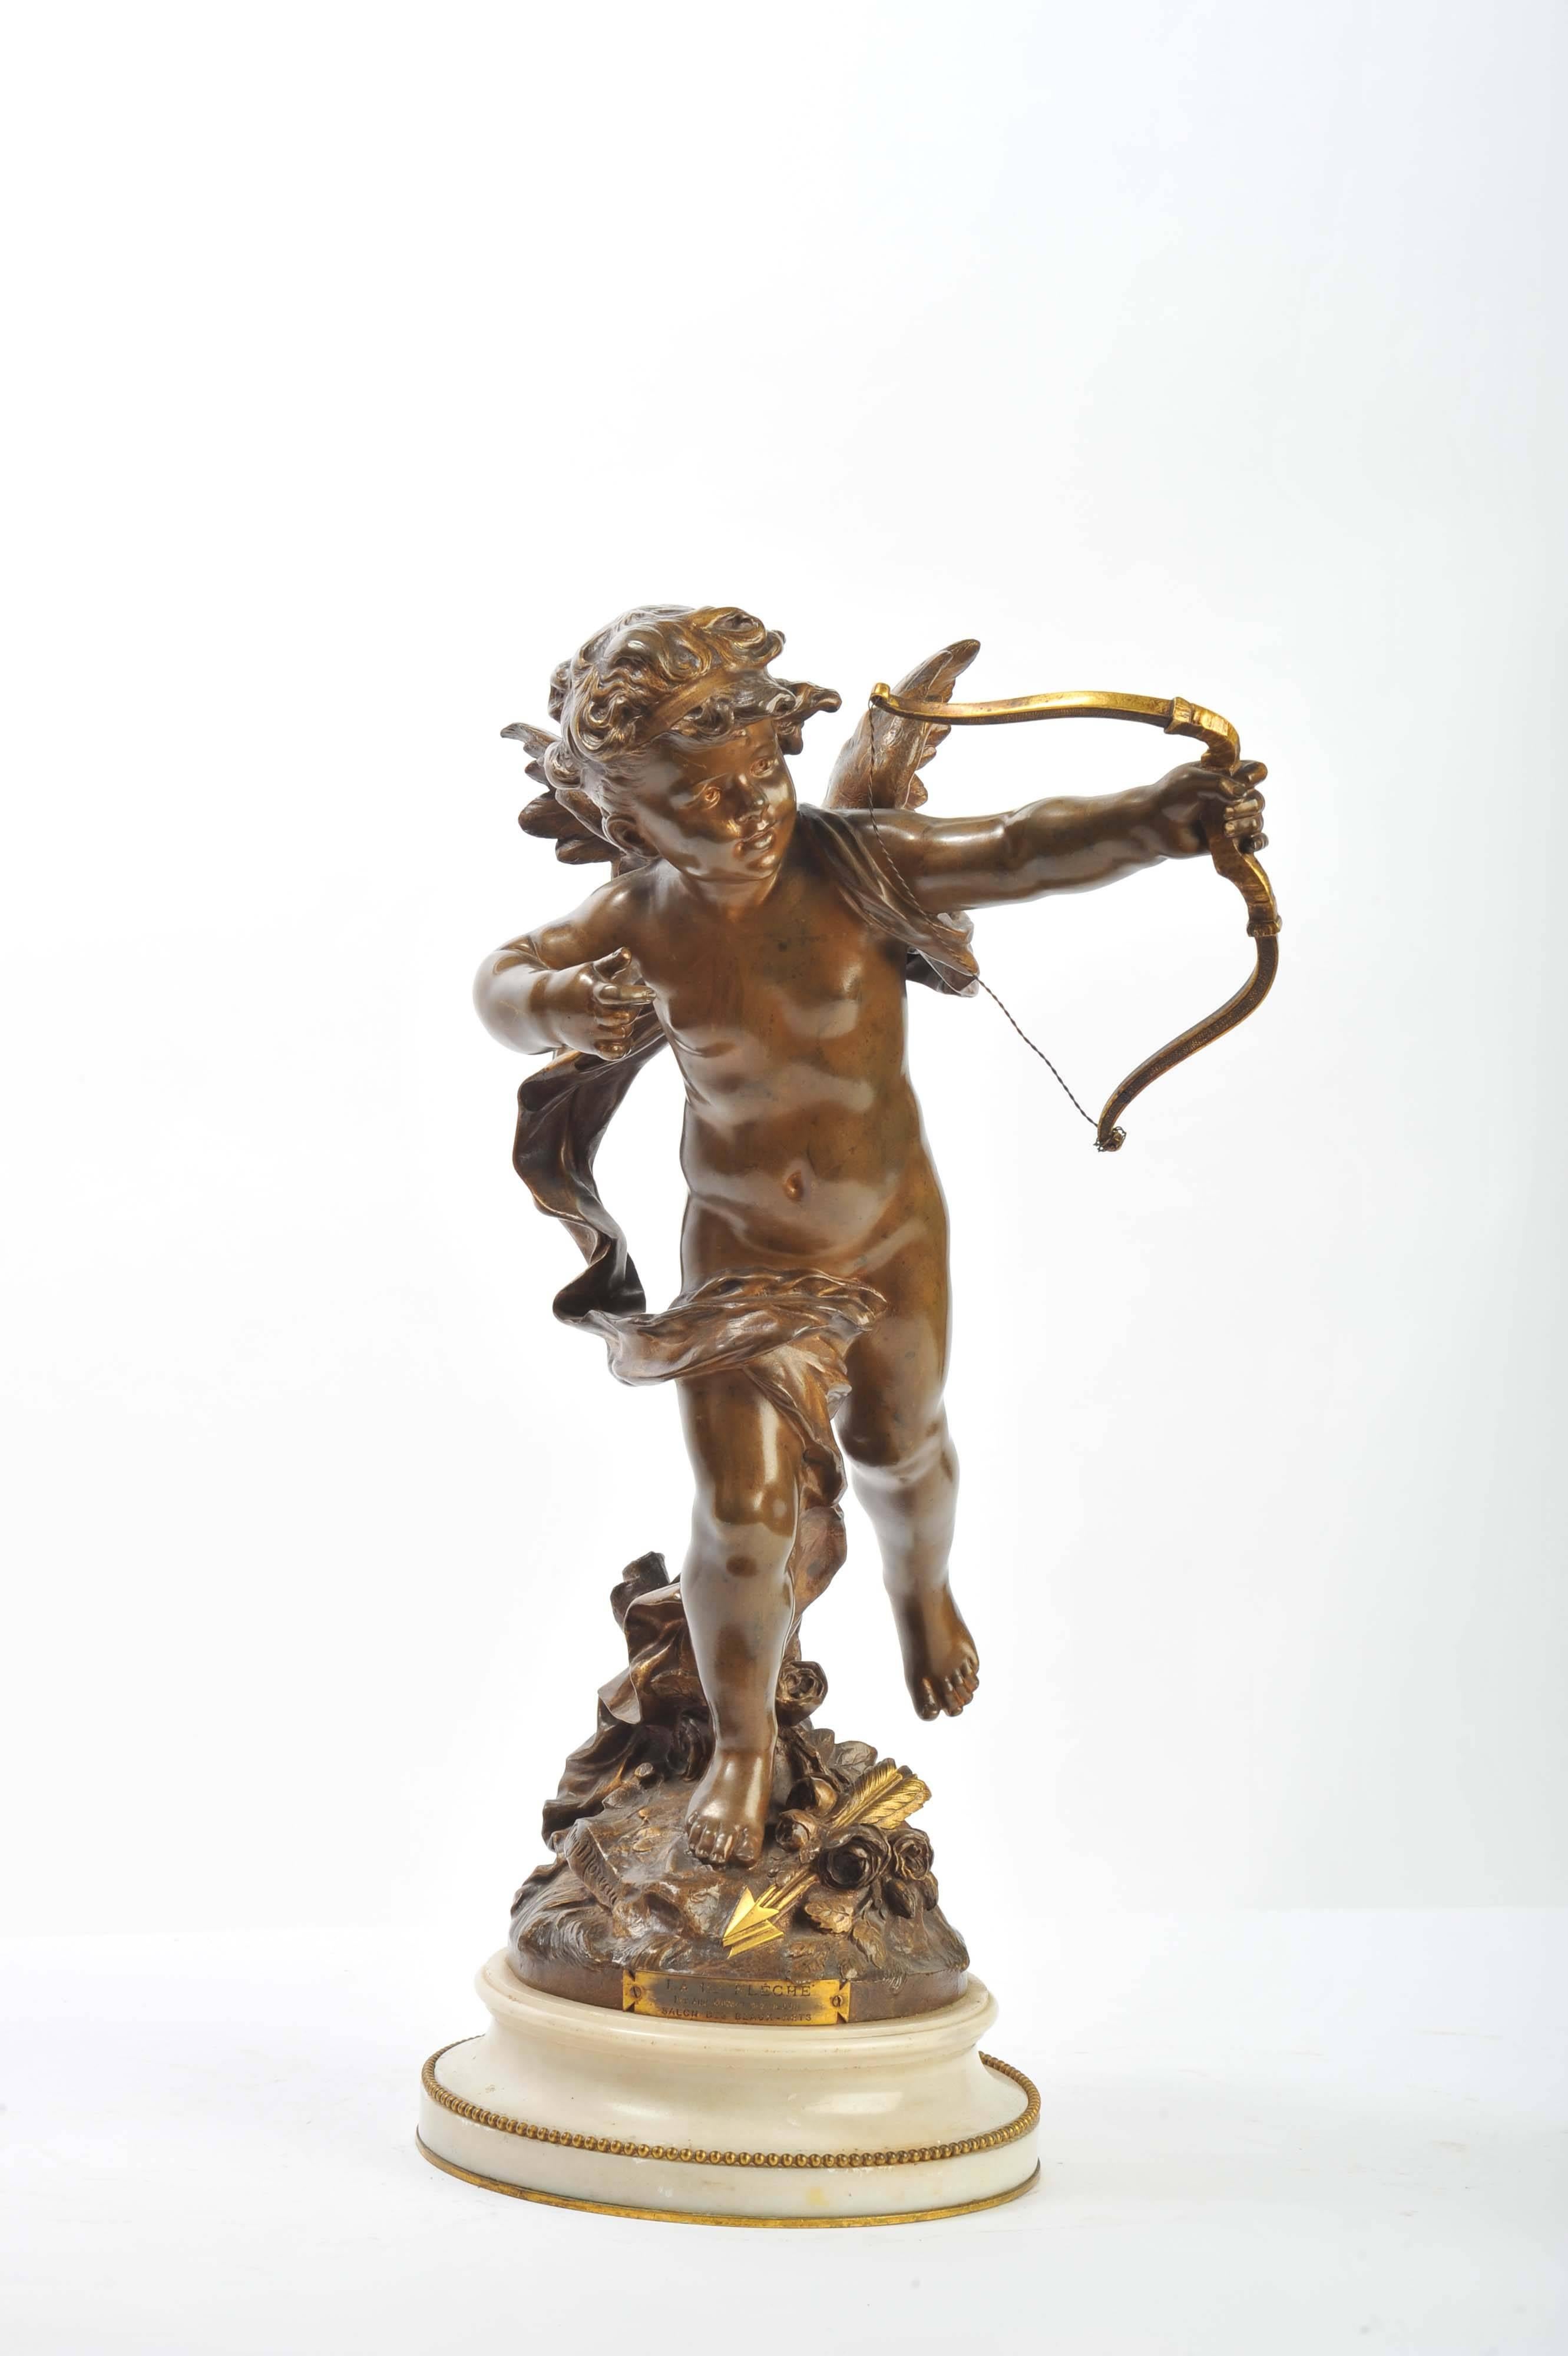 A fine quality 19th century bronze statue of a Cupid, with gilded high lights and mounted on a white marble base.